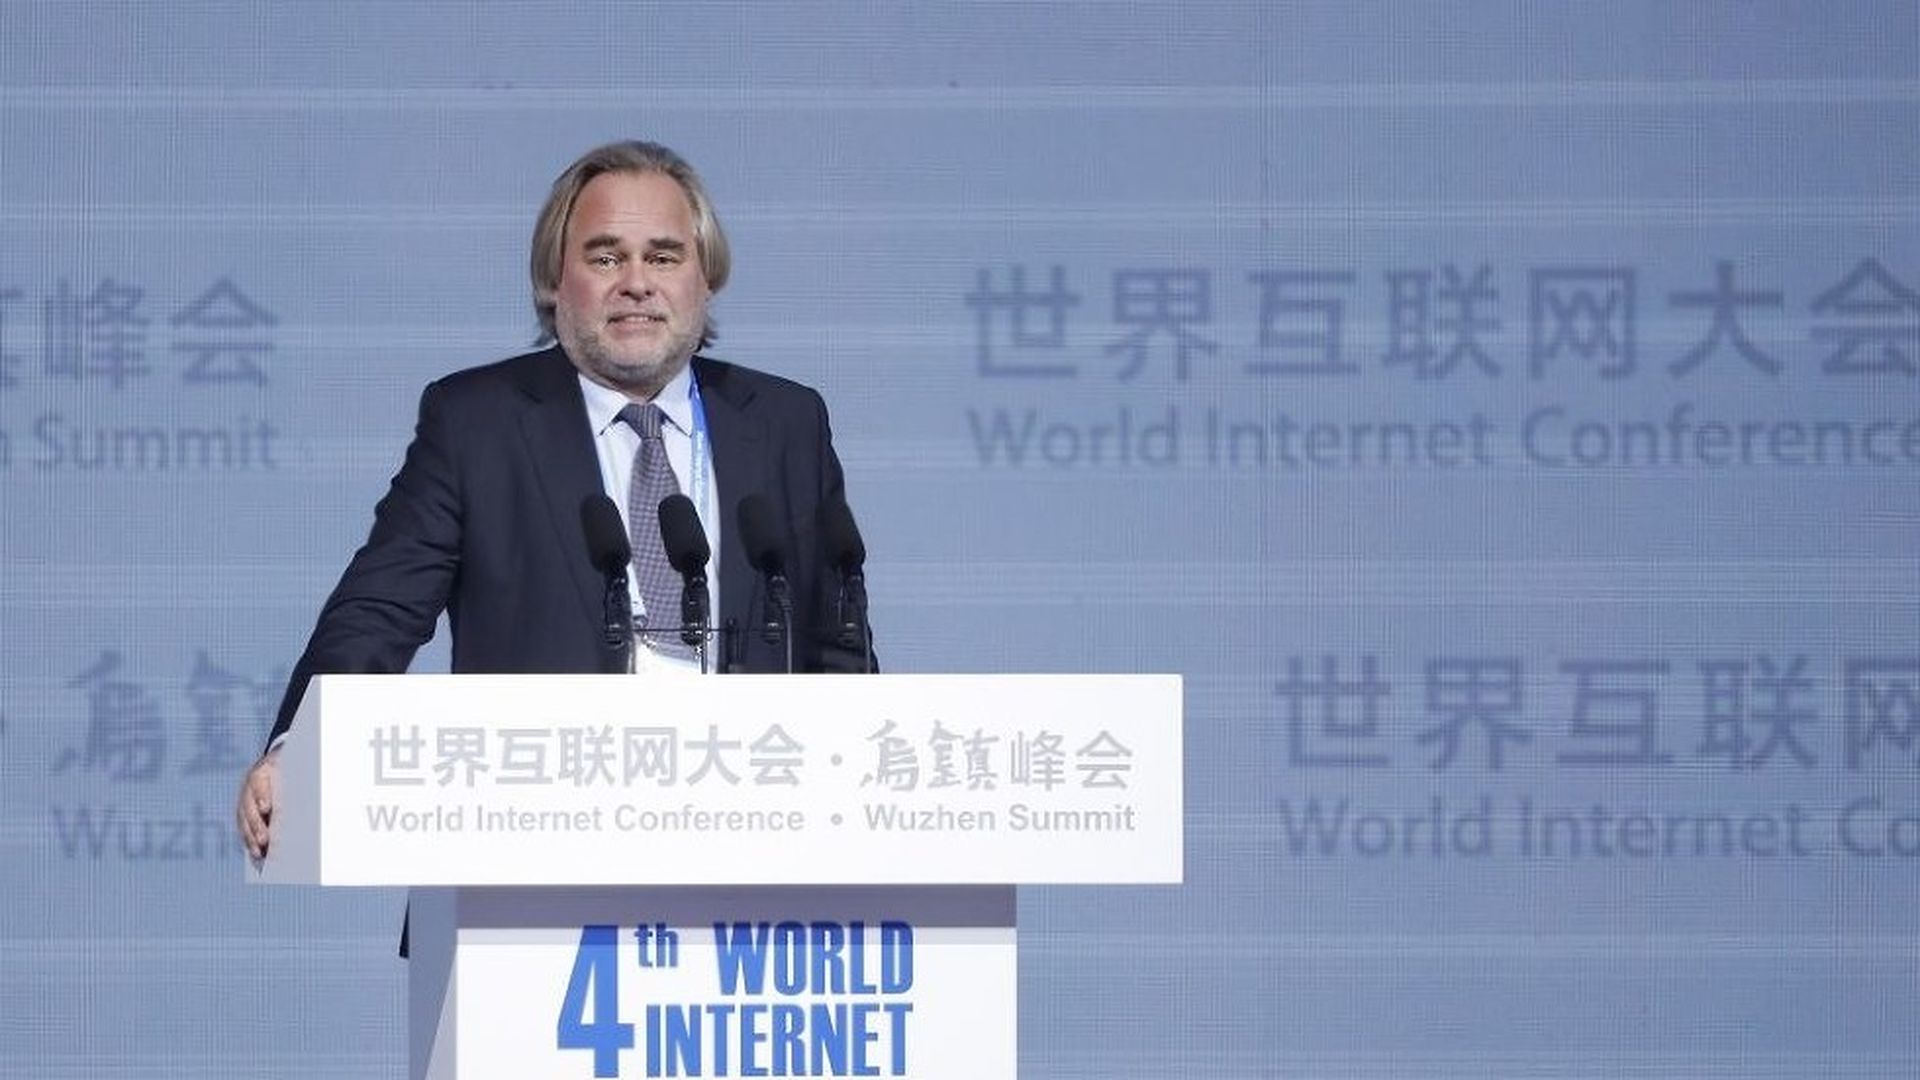 Kaspersky connections to Russian intelligence still undocumented